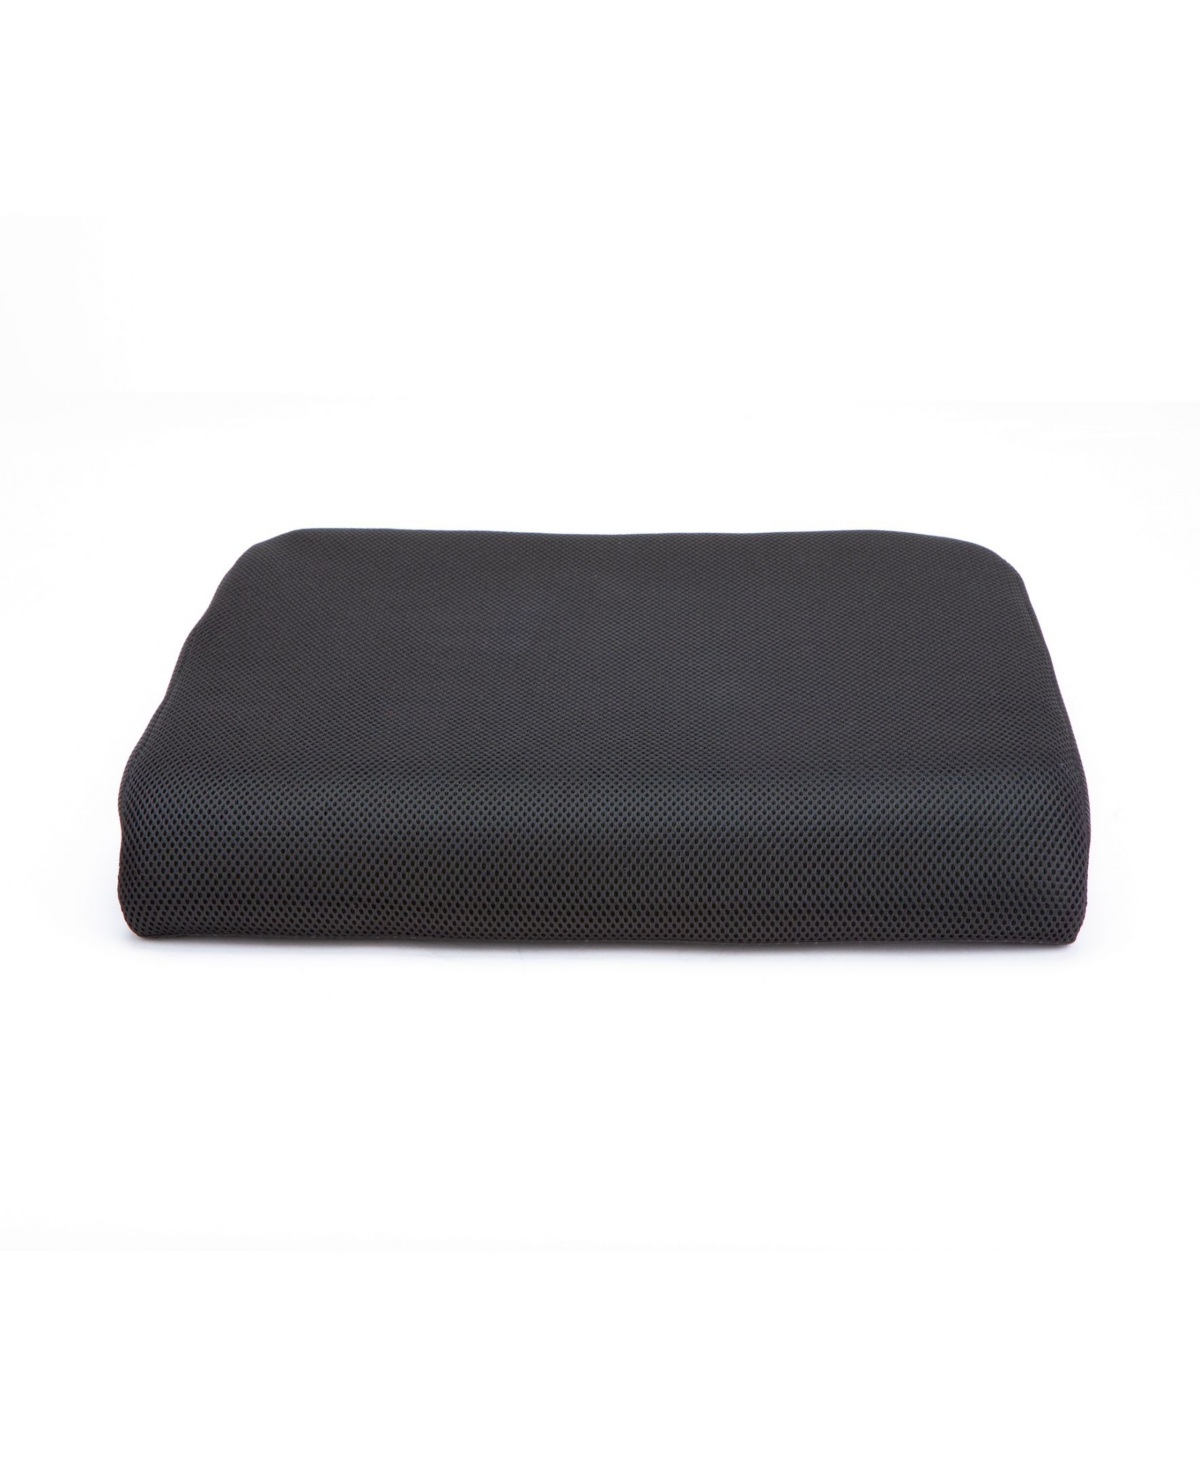 Large Seat Cushion with Carry Handle - Black